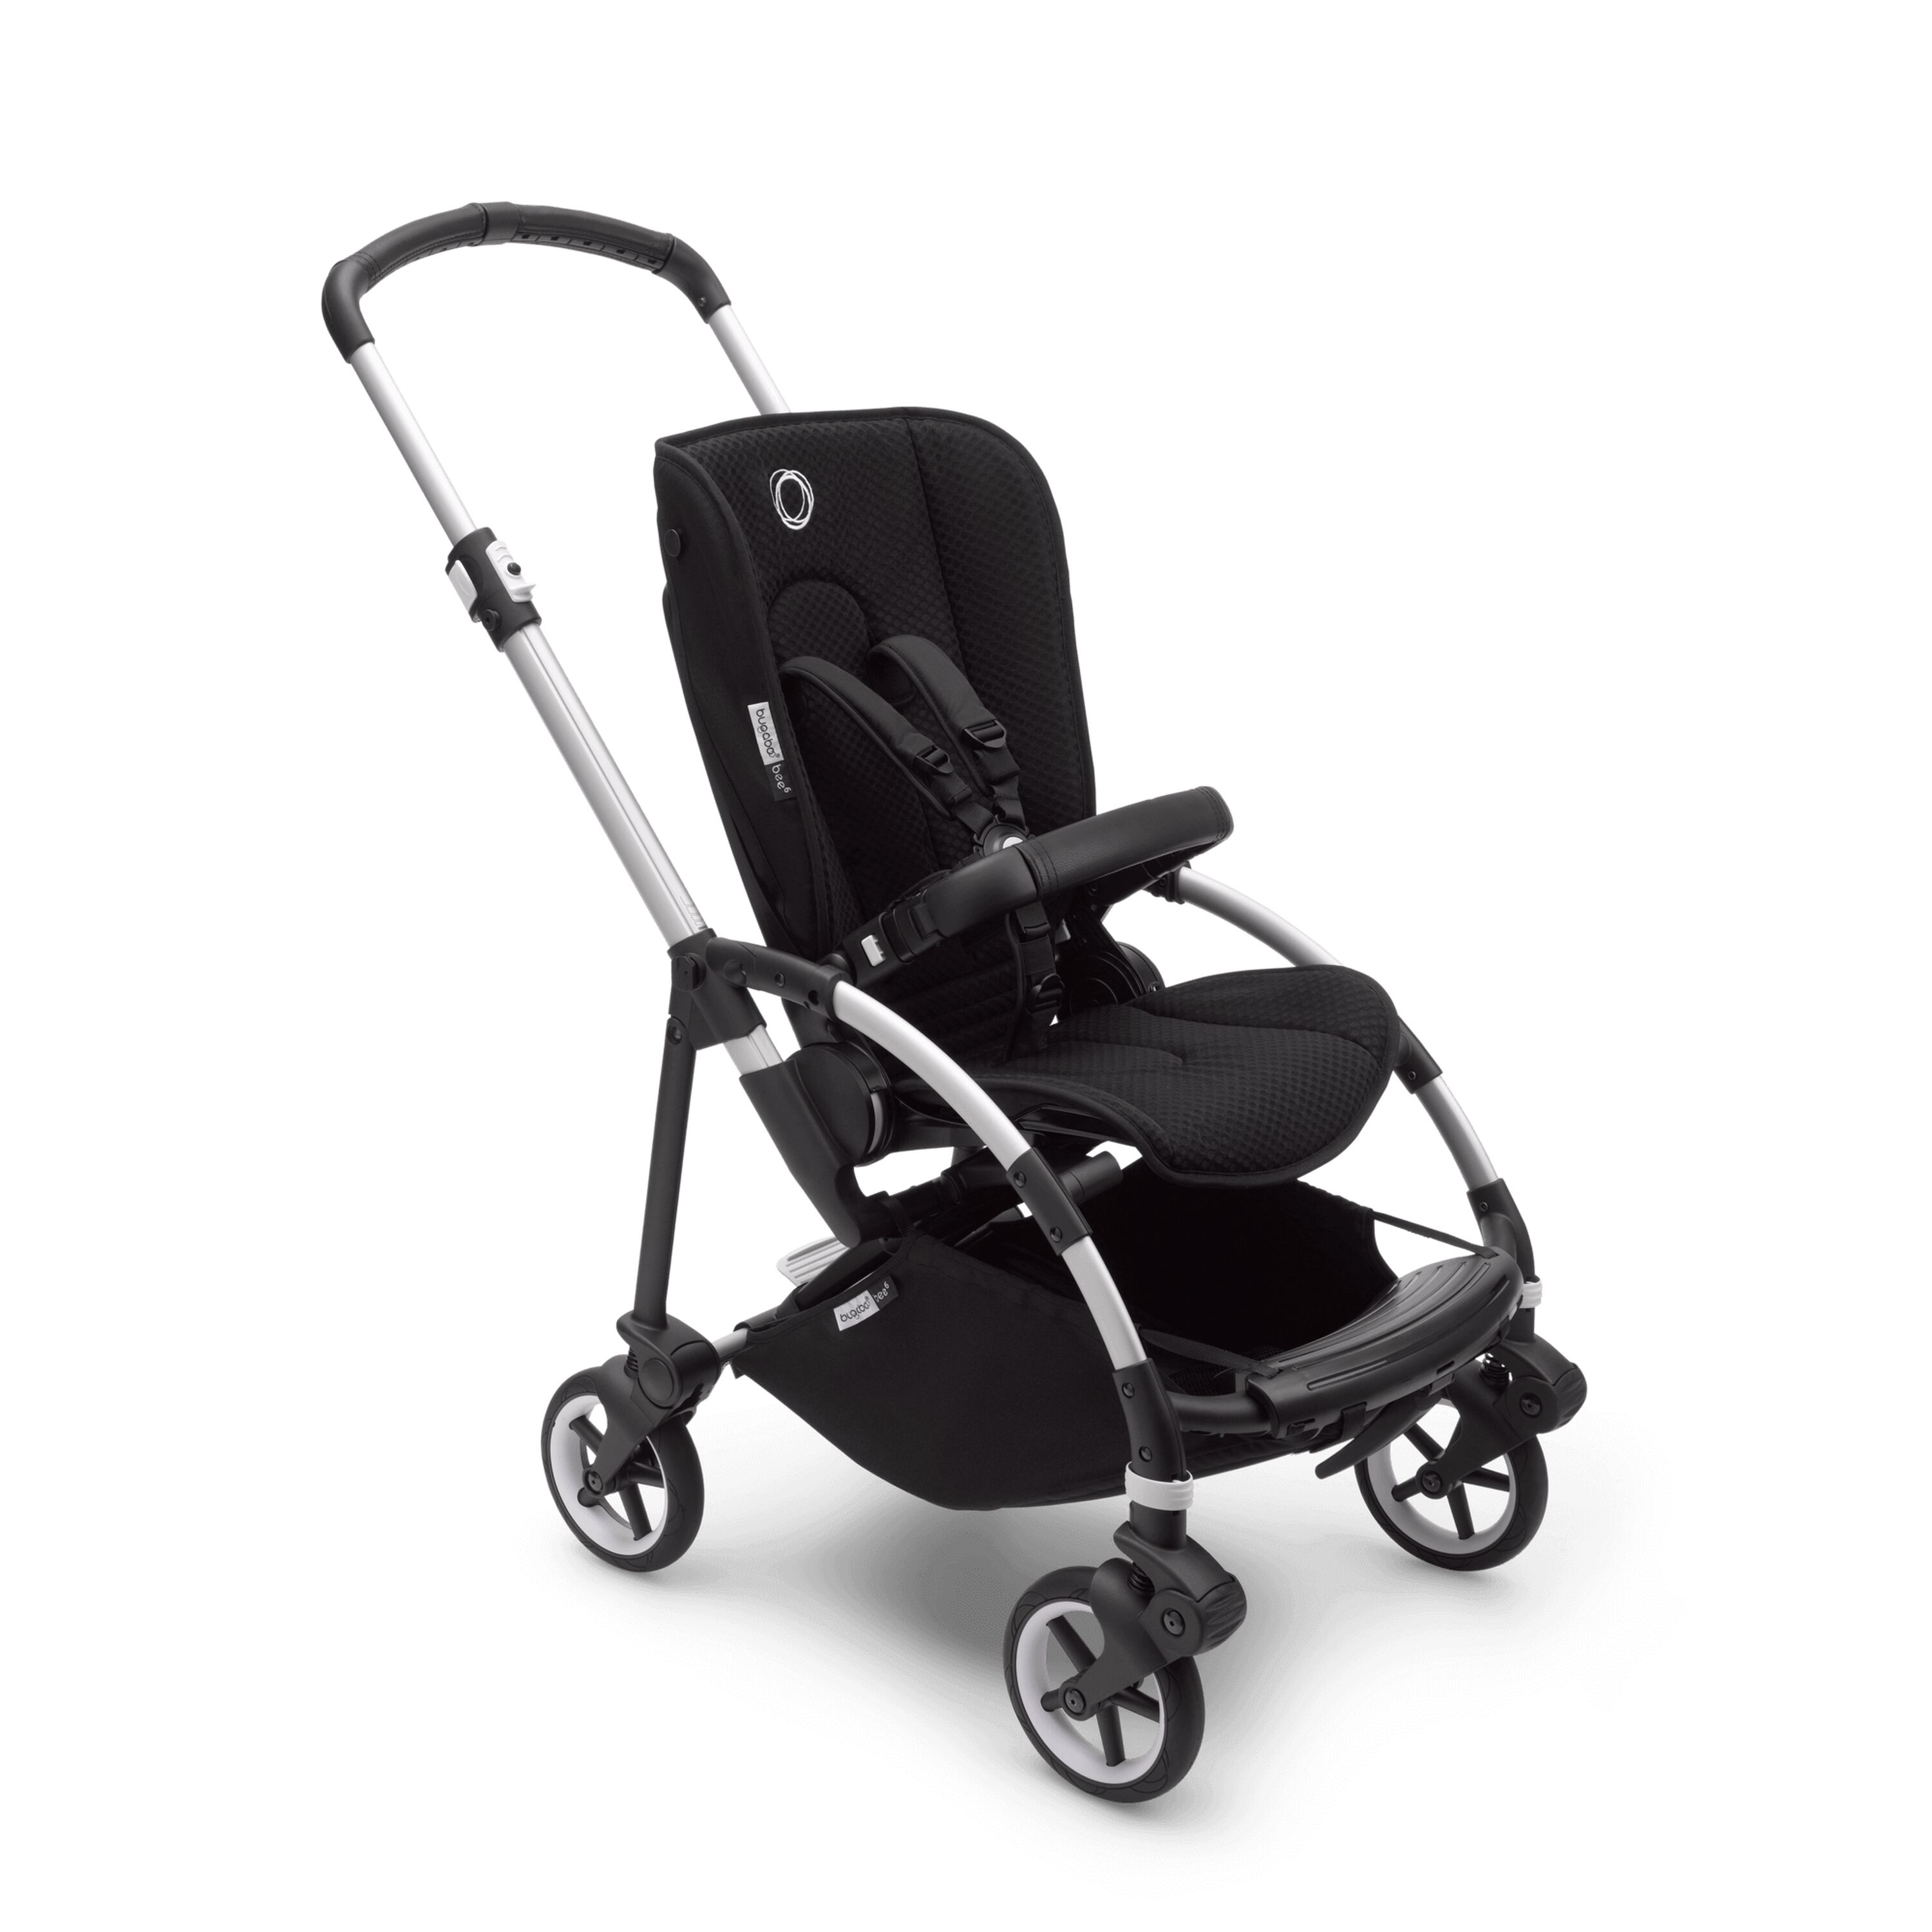 Bugaboo Bee6 Complete Stroller - Free shipping!